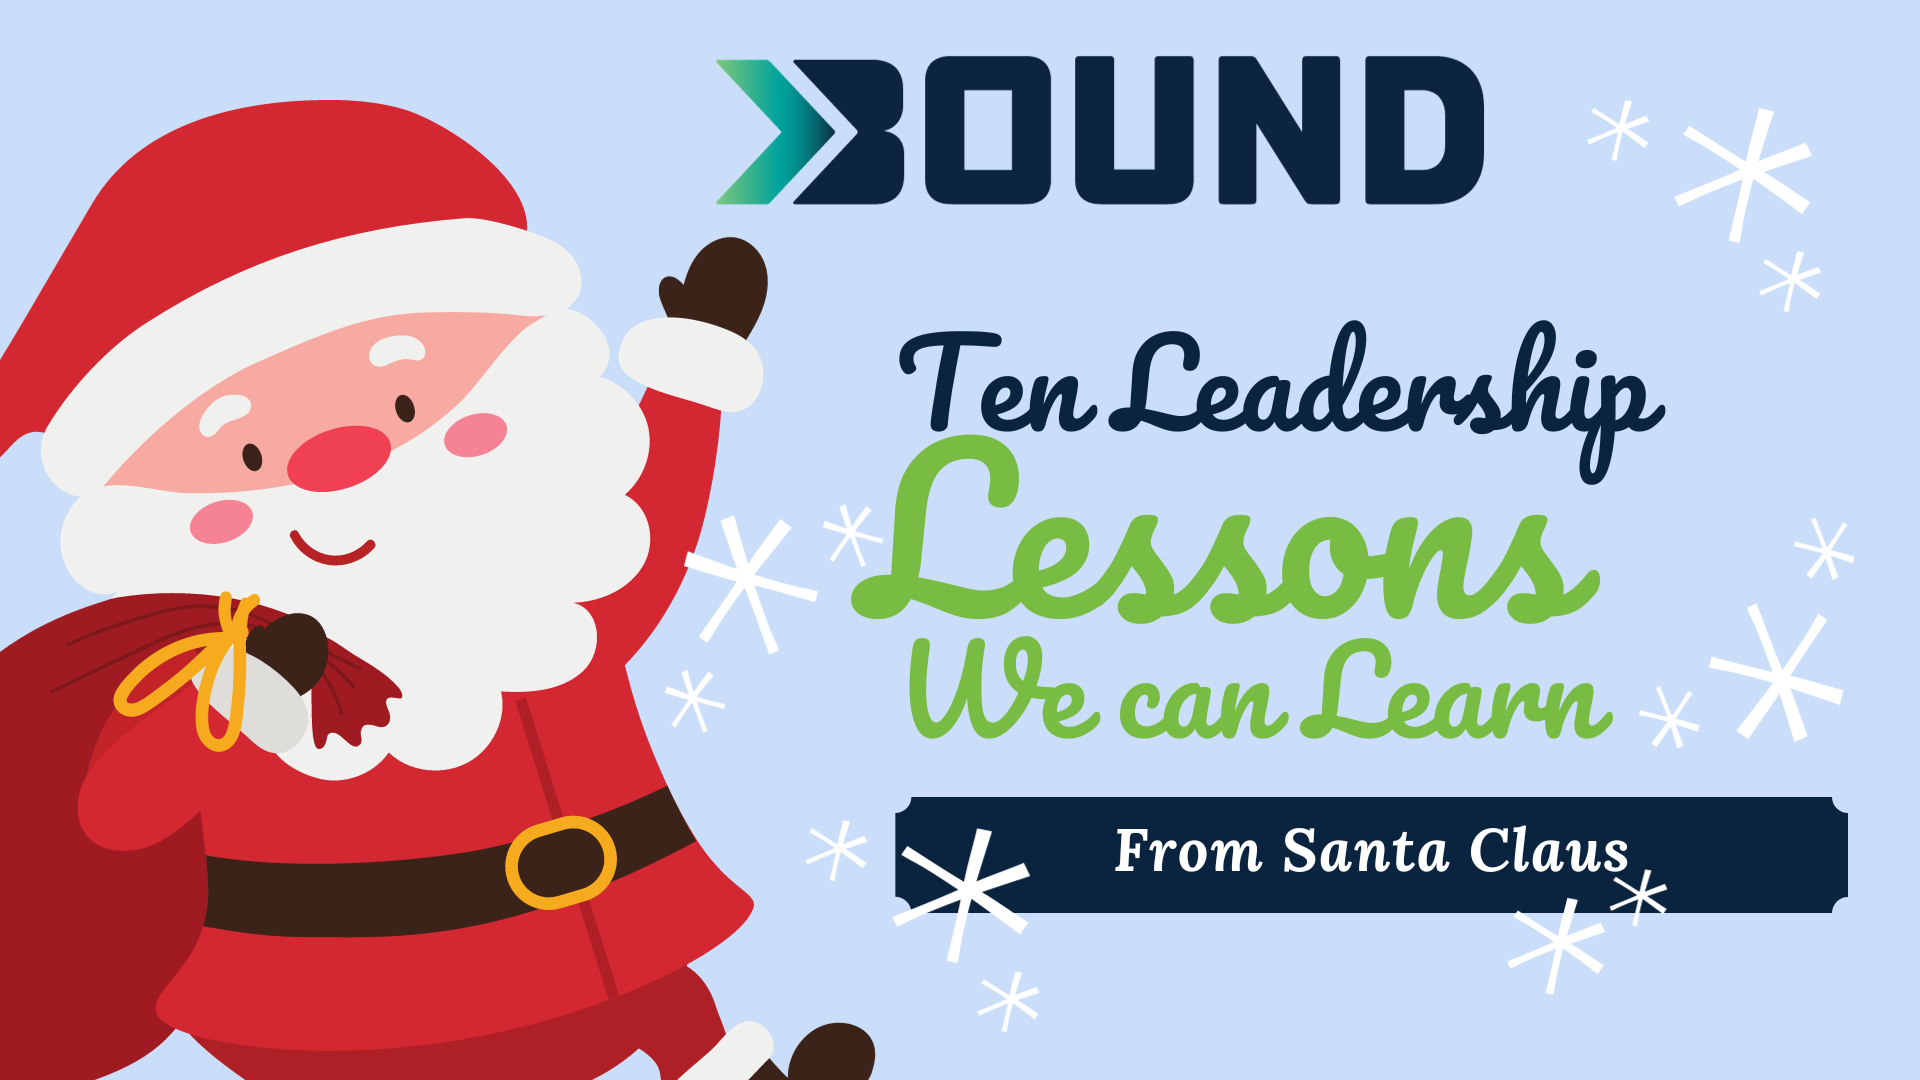 Beyond Bound: Ten Leadership Lessons We Can Learn from Santa